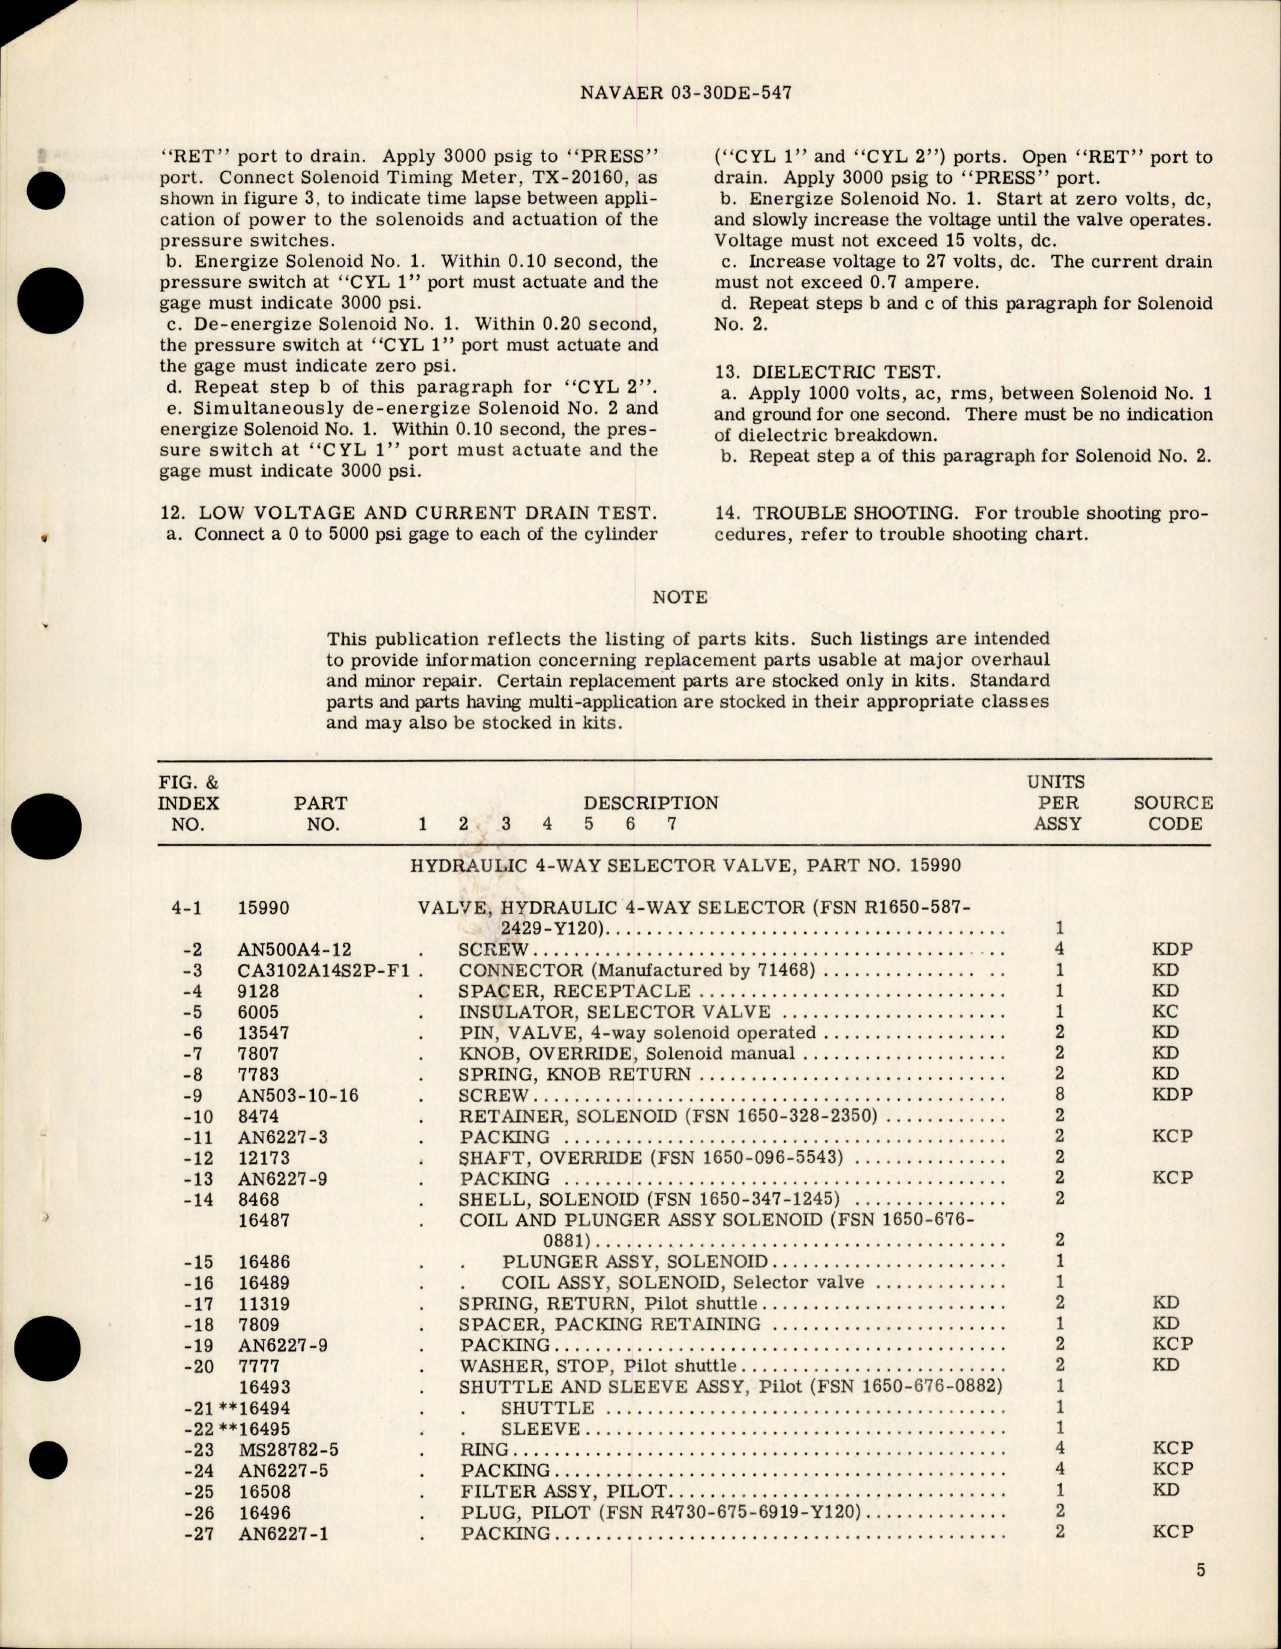 Sample page 5 from AirCorps Library document: Overhaul Instructions with Parts Breakdown for Hydraulic 4Way Selector Valve - Part 15990